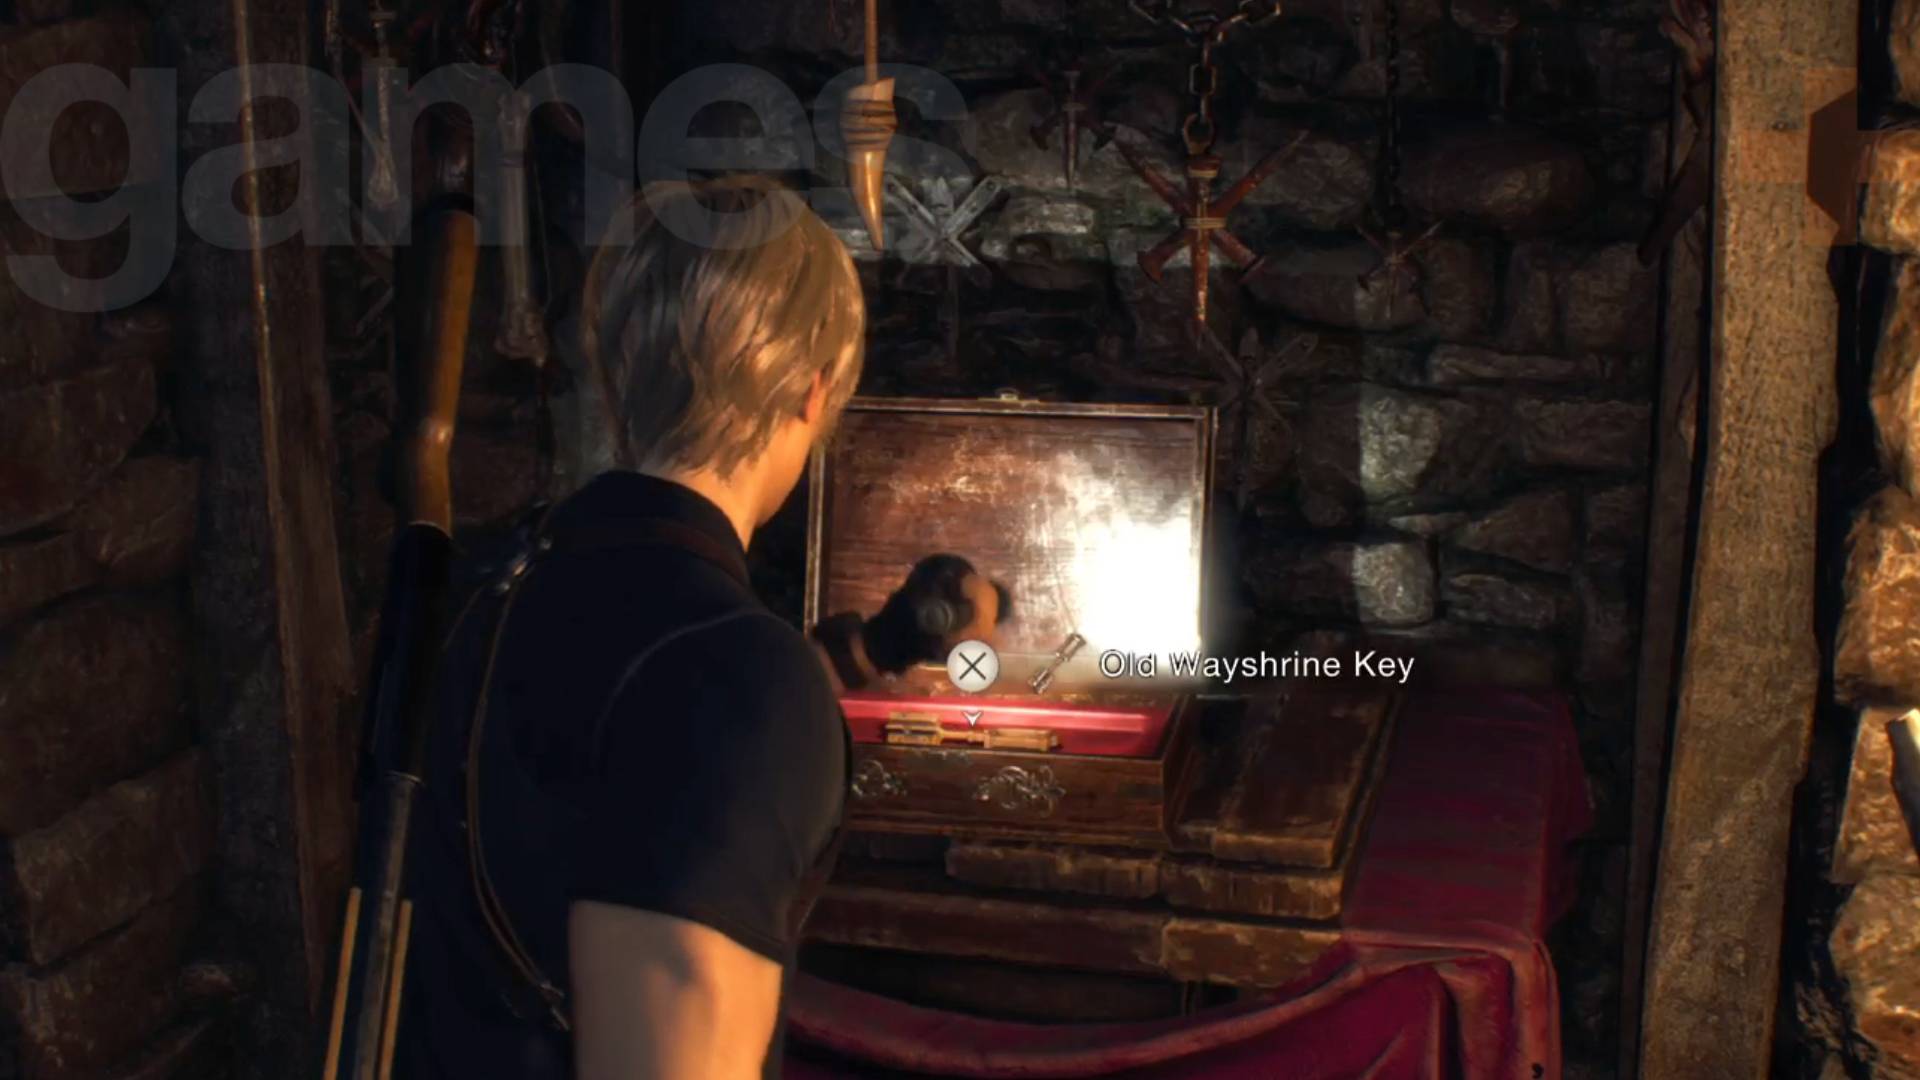 Where to find the Square Lock Box key in Resident Evil 4 Remake